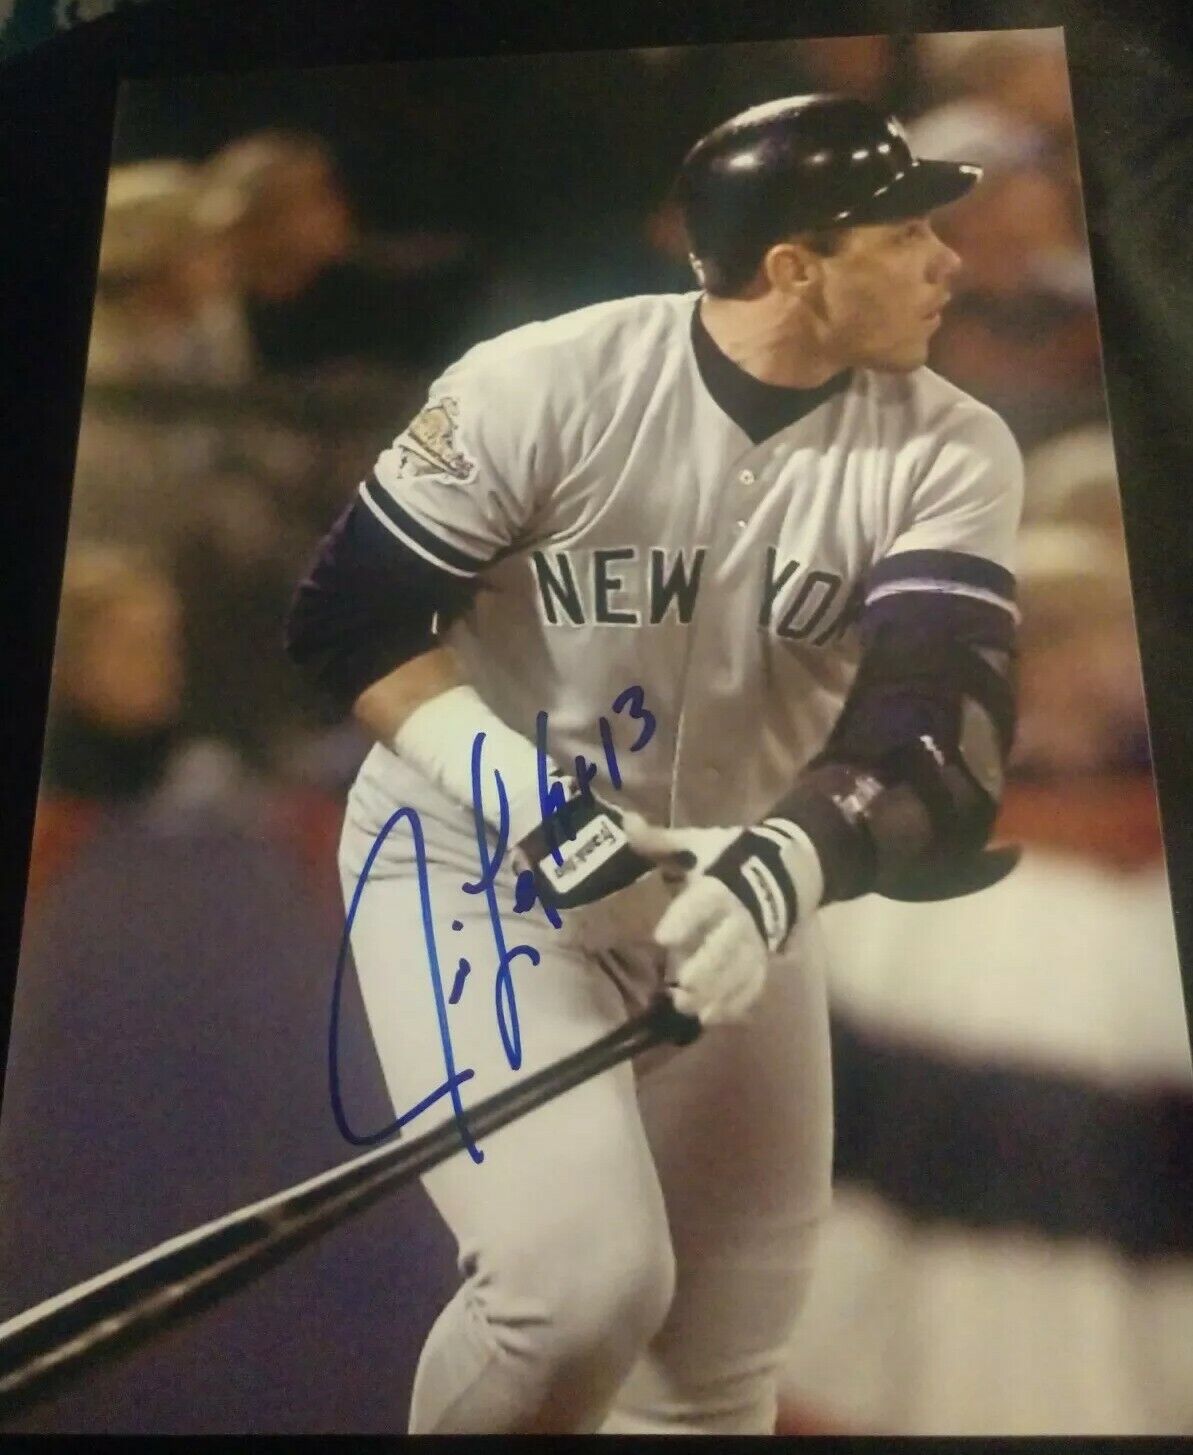 JIM LEYRITZ SIGNED 8X10 PHOTO NY YANKEES BIG HR BRAVES WS CHAMPS W/COA+PROOF WOW